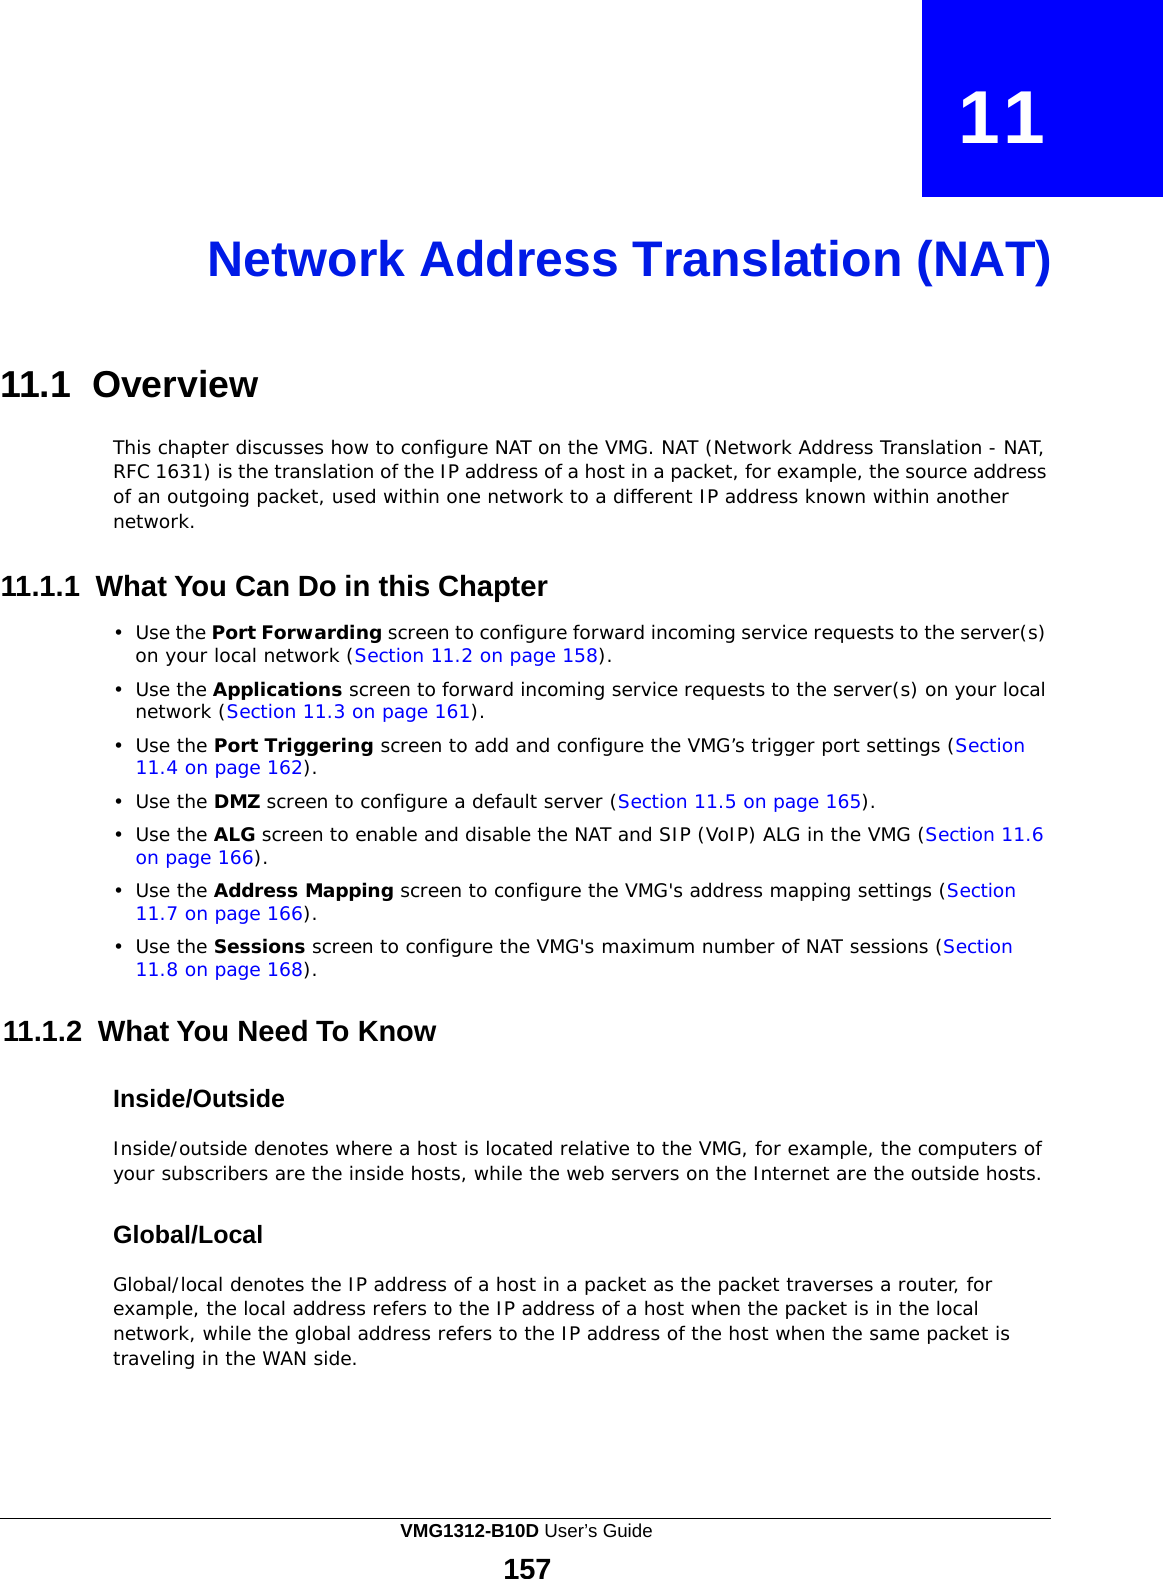  11    Network Address Translation (NAT)     11.1 Overview  This chapter discusses how to configure NAT on the VMG. NAT (Network Address Translation - NAT, RFC 1631) is the translation of the IP address of a host in a packet, for example, the source address of an outgoing packet, used within one network to a different IP address known within another network.   11.1.1 What You Can Do in this Chapter  •  Use the Port Forwarding screen to configure forward incoming service requests to the server(s) on your local network (Section 11.2 on page 158).  •  Use the Applications screen to forward incoming service requests to the server(s) on your local network (Section 11.3 on page 161).  •  Use the Port Triggering screen to add and configure the VMG’s trigger port settings (Section 11.4 on page 162).  •  Use the DMZ screen to configure a default server (Section 11.5 on page 165).  •  Use the ALG screen to enable and disable the NAT and SIP (VoIP) ALG in the VMG (Section 11.6 on page 166). •  Use the Address Mapping screen to configure the VMG&apos;s address mapping settings (Section 11.7 on page 166).  •  Use the Sessions screen to configure the VMG&apos;s maximum number of NAT sessions (Section 11.8 on page 168).   11.1.2 What You Need To Know   Inside/Outside  Inside/outside denotes where a host is located relative to the VMG, for example, the computers of your subscribers are the inside hosts, while the web servers on the Internet are the outside hosts.   Global/Local  Global/local denotes the IP address of a host in a packet as the packet traverses a router, for example, the local address refers to the IP address of a host when the packet is in the local network, while the global address refers to the IP address of the host when the same packet is traveling in the WAN side. VMG1312-B10D User’s Guide 157  